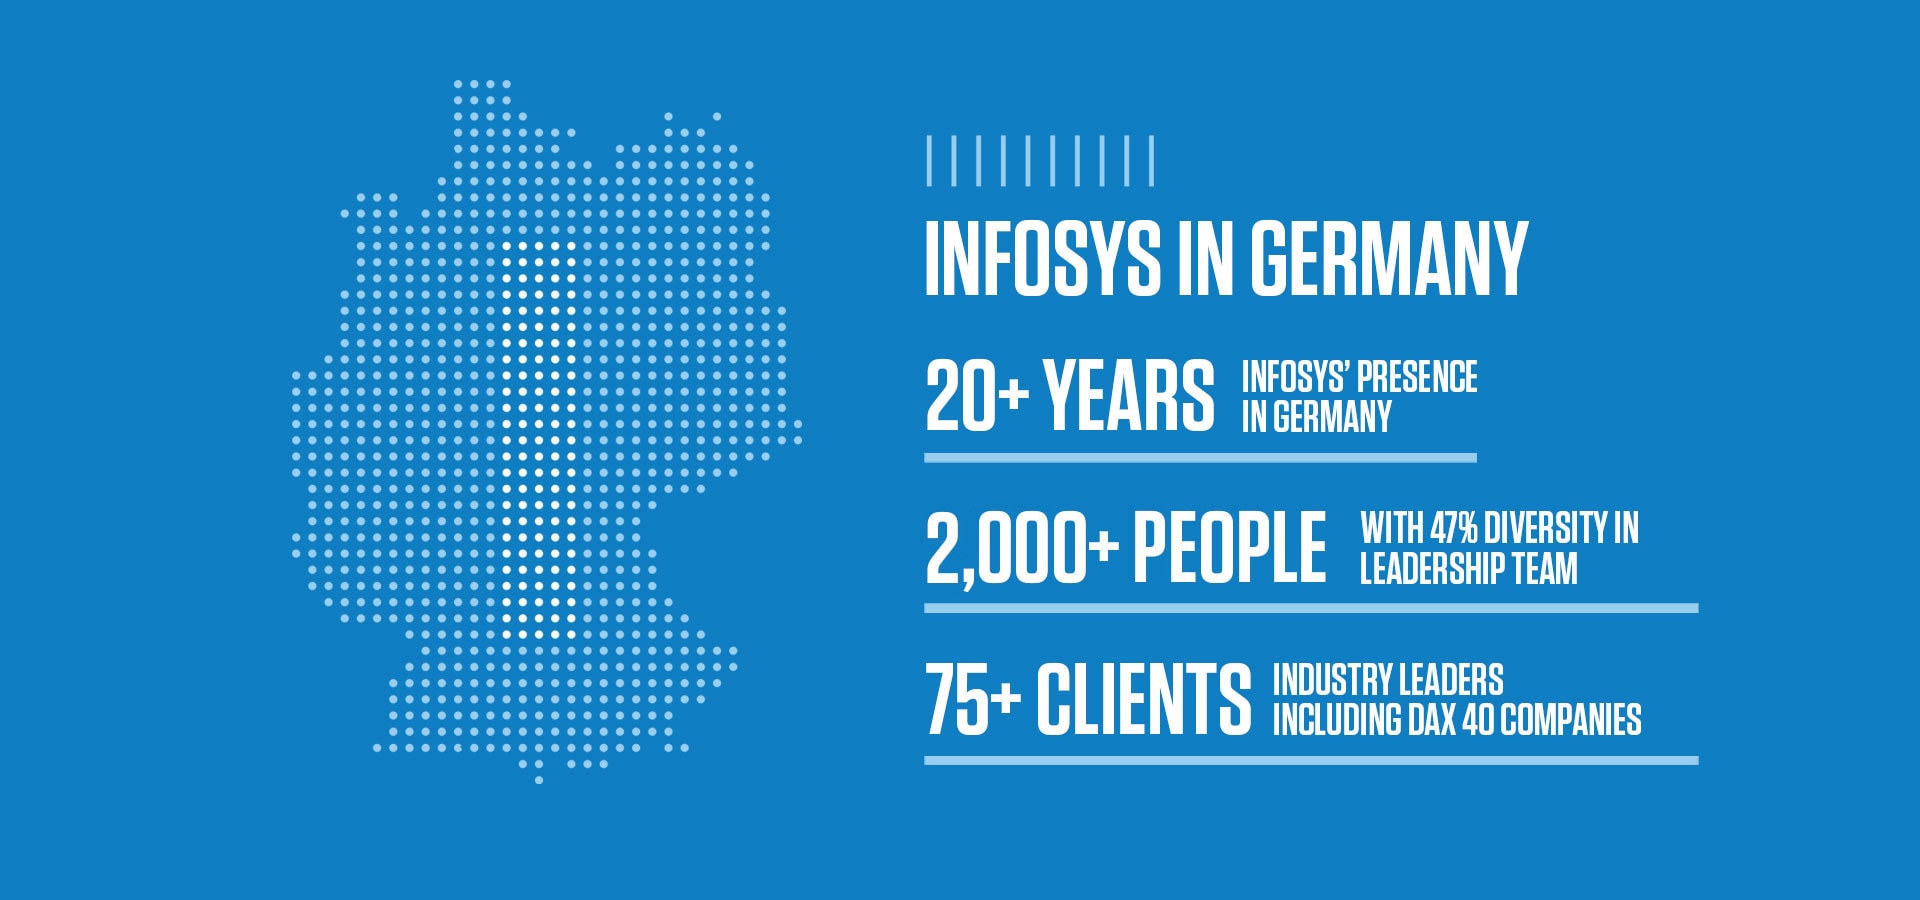 Infosys in Germany